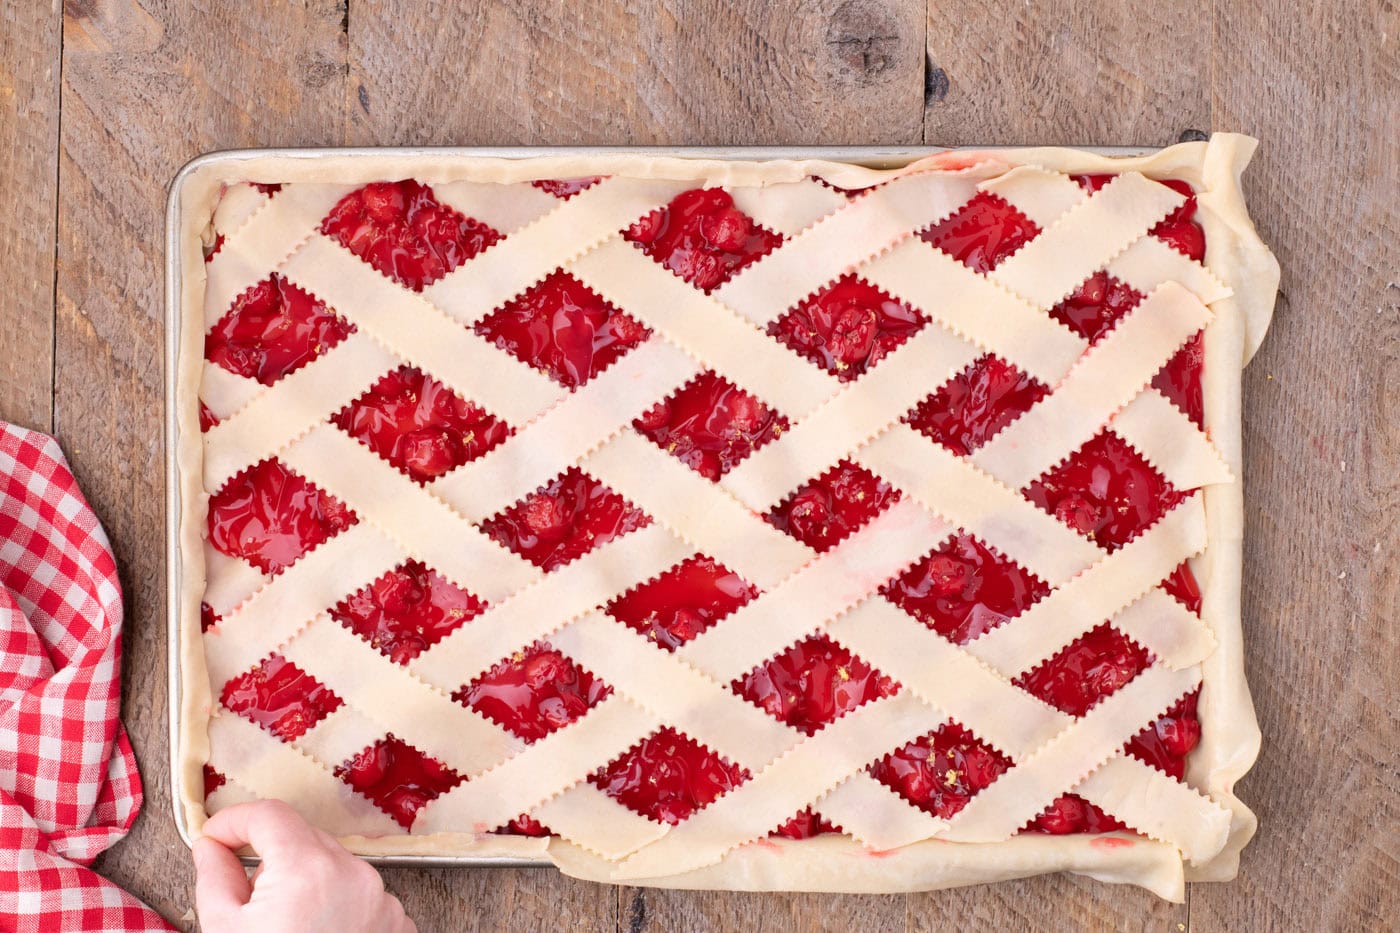 pinching seams of pie crust together to seal edges of cherry slab pie